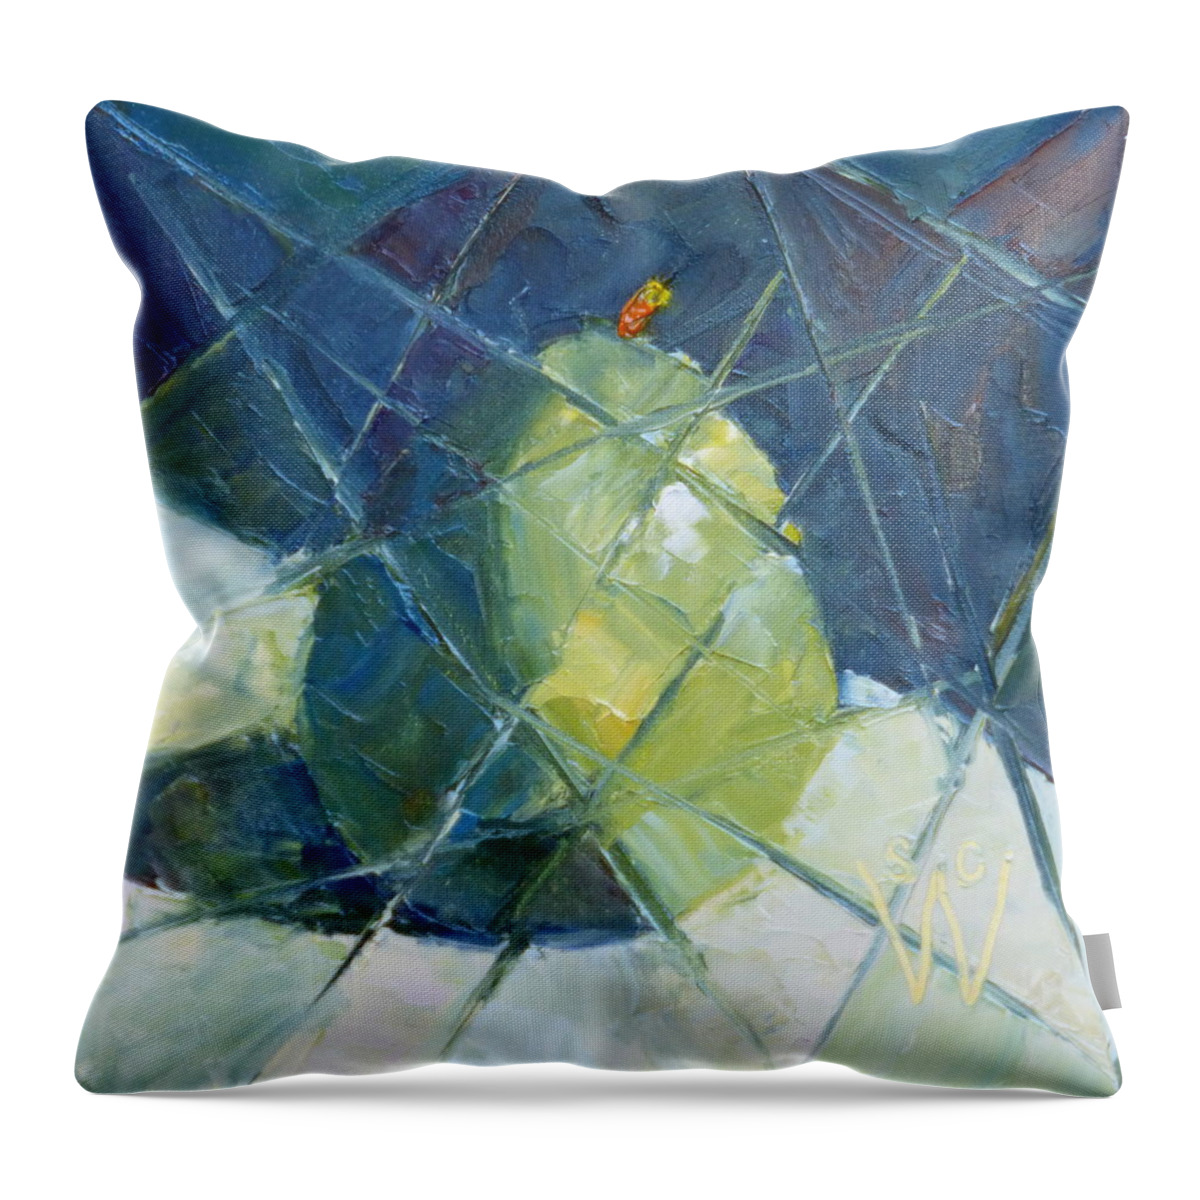 Still Life Throw Pillow featuring the painting Fractured D'Anjou by Susan Woodward